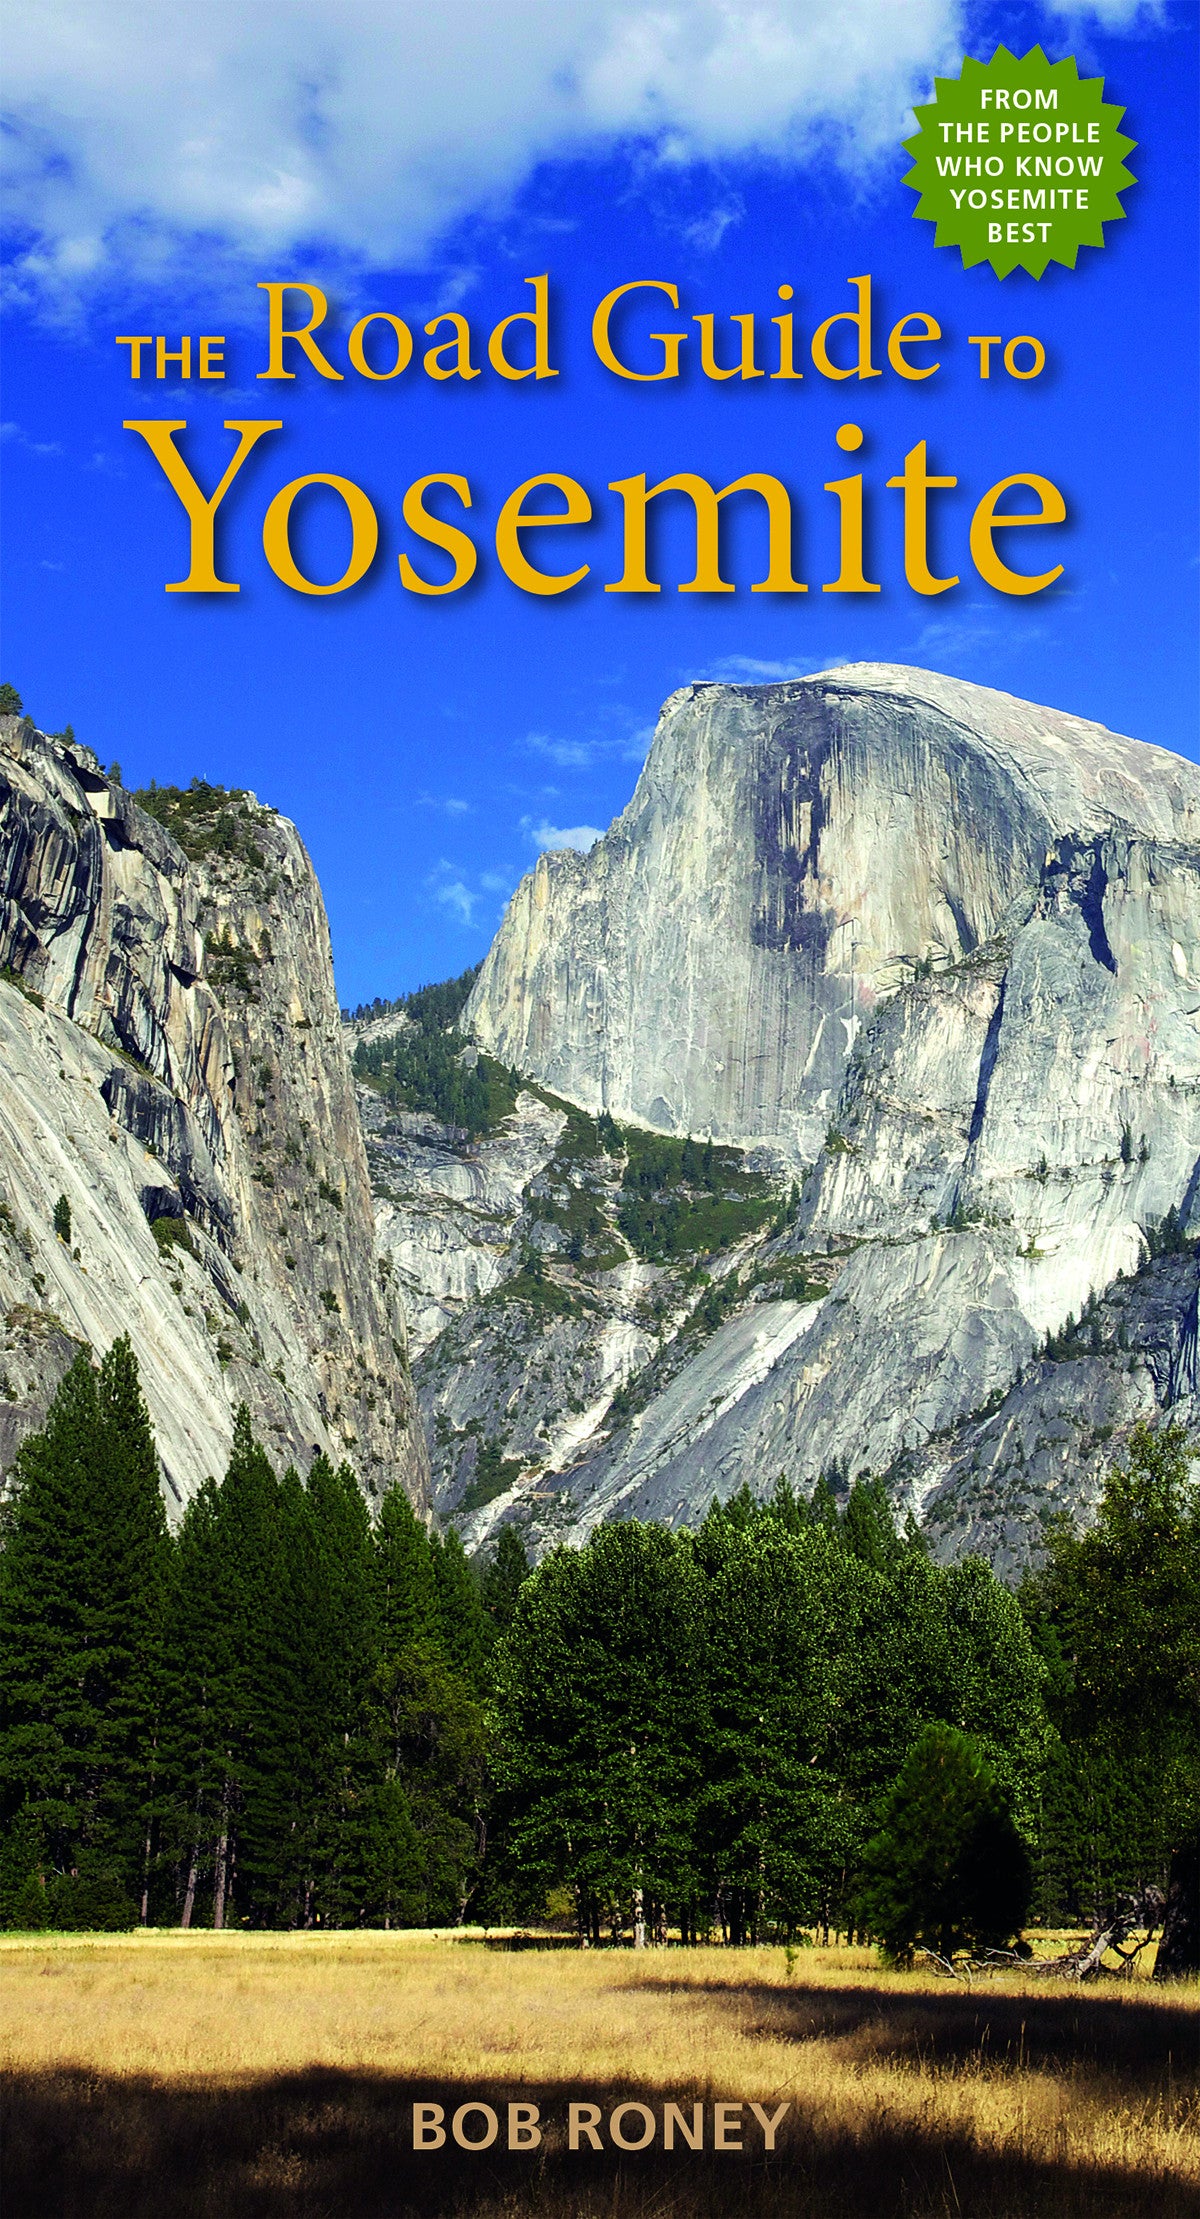 The Road Guide To Yosemite